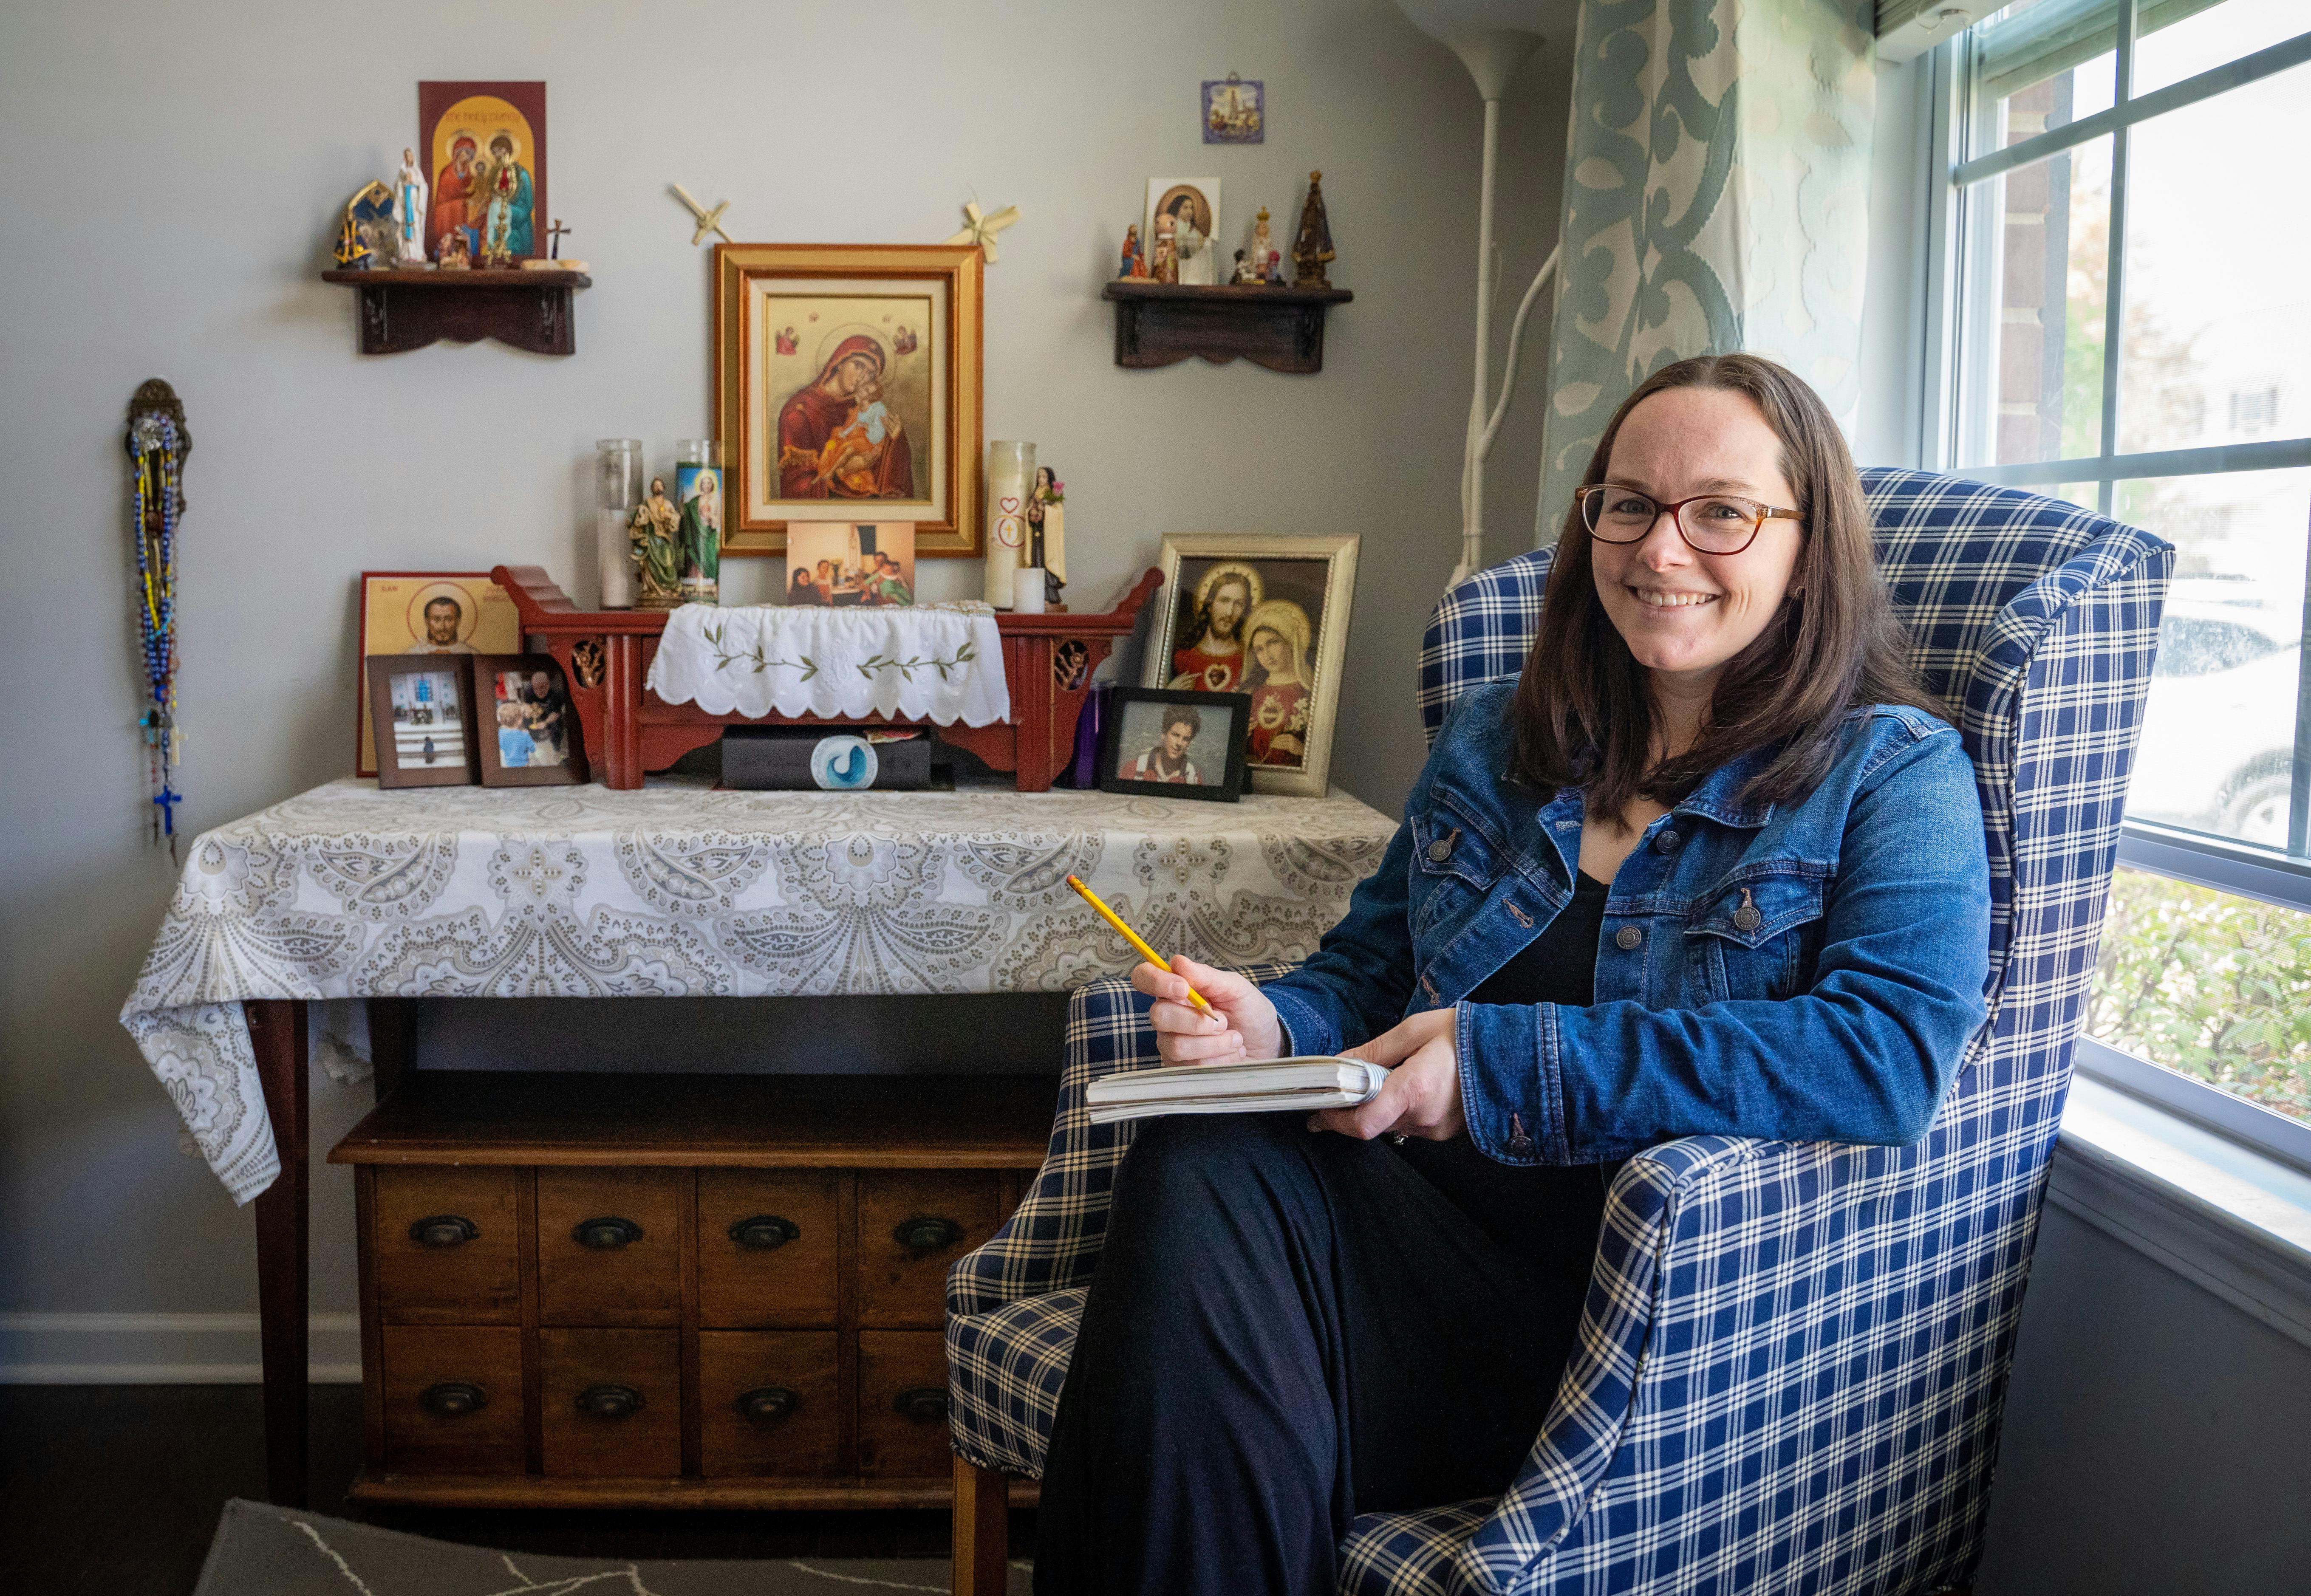 Marie Mattos is pictured with her sketchbook and home altar, which features images of Jesus, Mary and the saints. Mattos, who always loved dabbling in art, majored in studio art at Michigan State and began freelancing a few years ago.